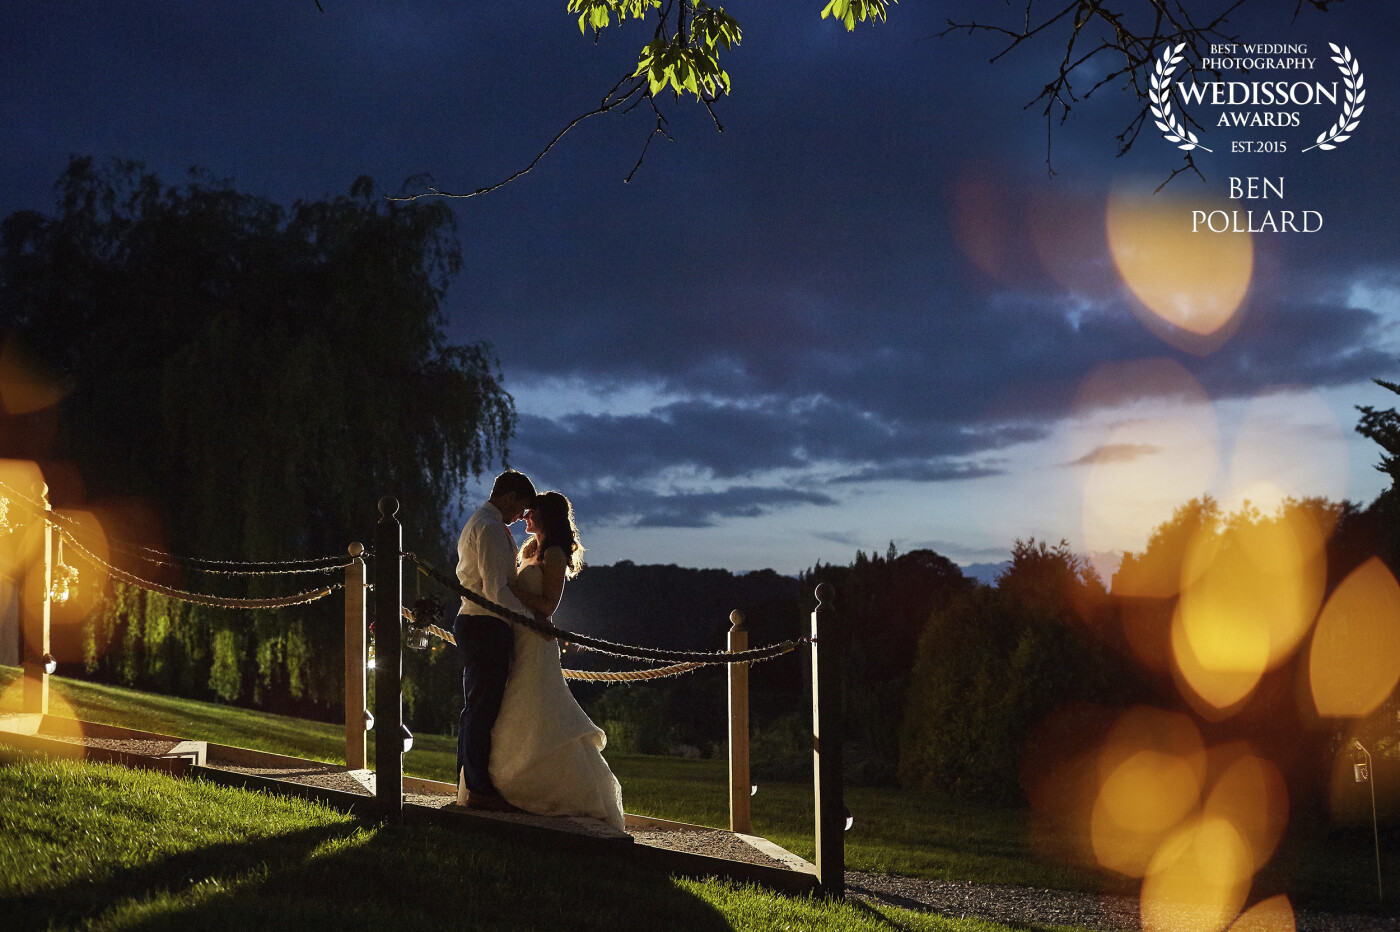 A magical evening in June, with a dab of flash from behind the couple and some foreground added in post to warm it up a little. The end to a perfect day for a very charming pair of newlyweds.